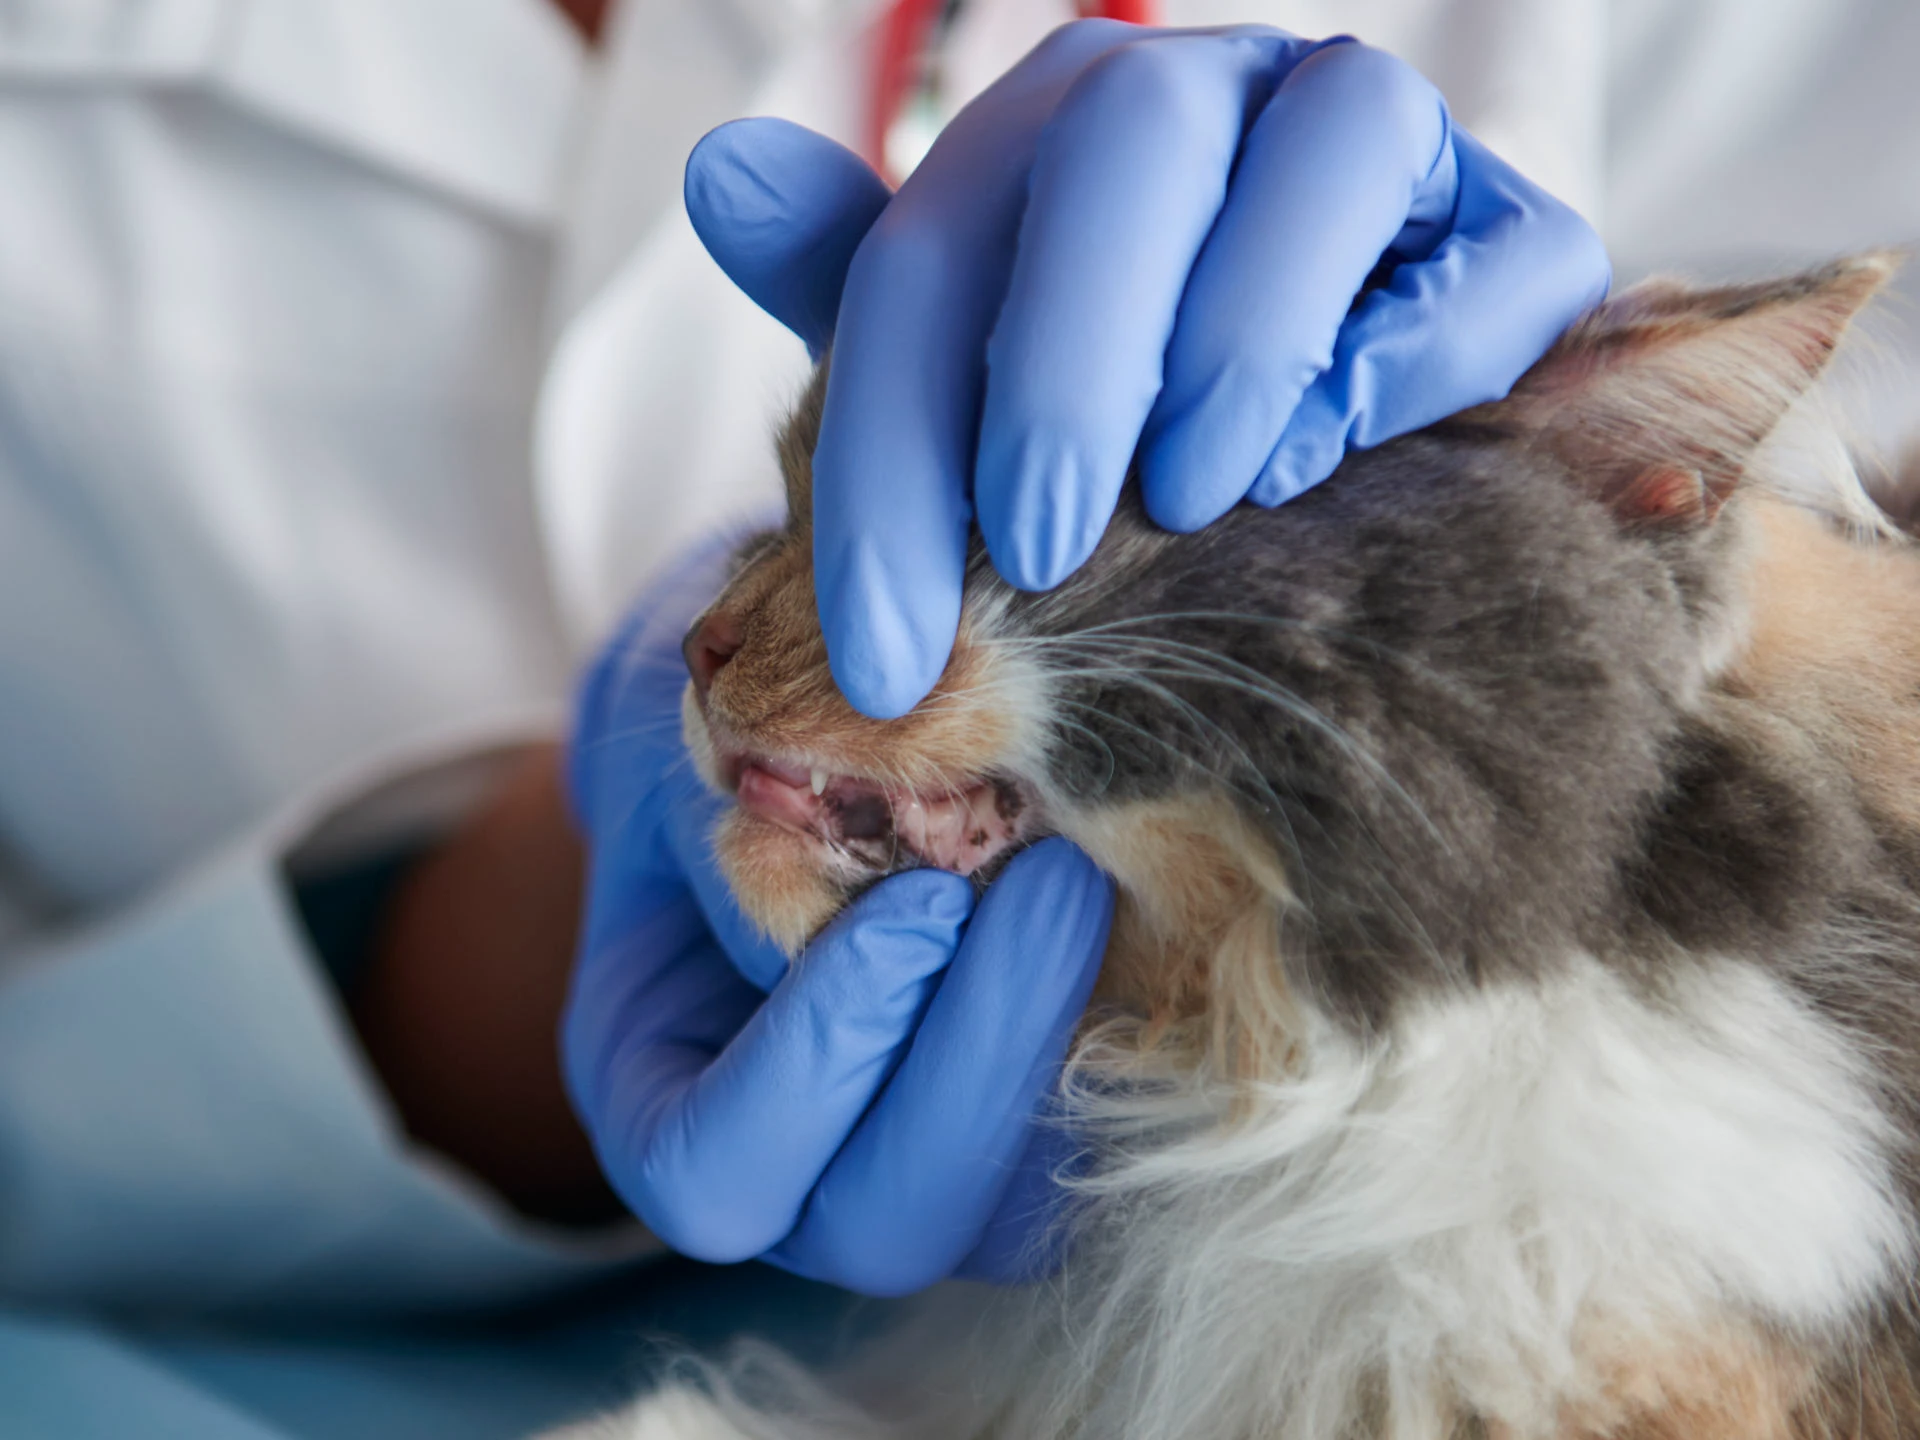 A vet is checking a cat's teeth and gums.